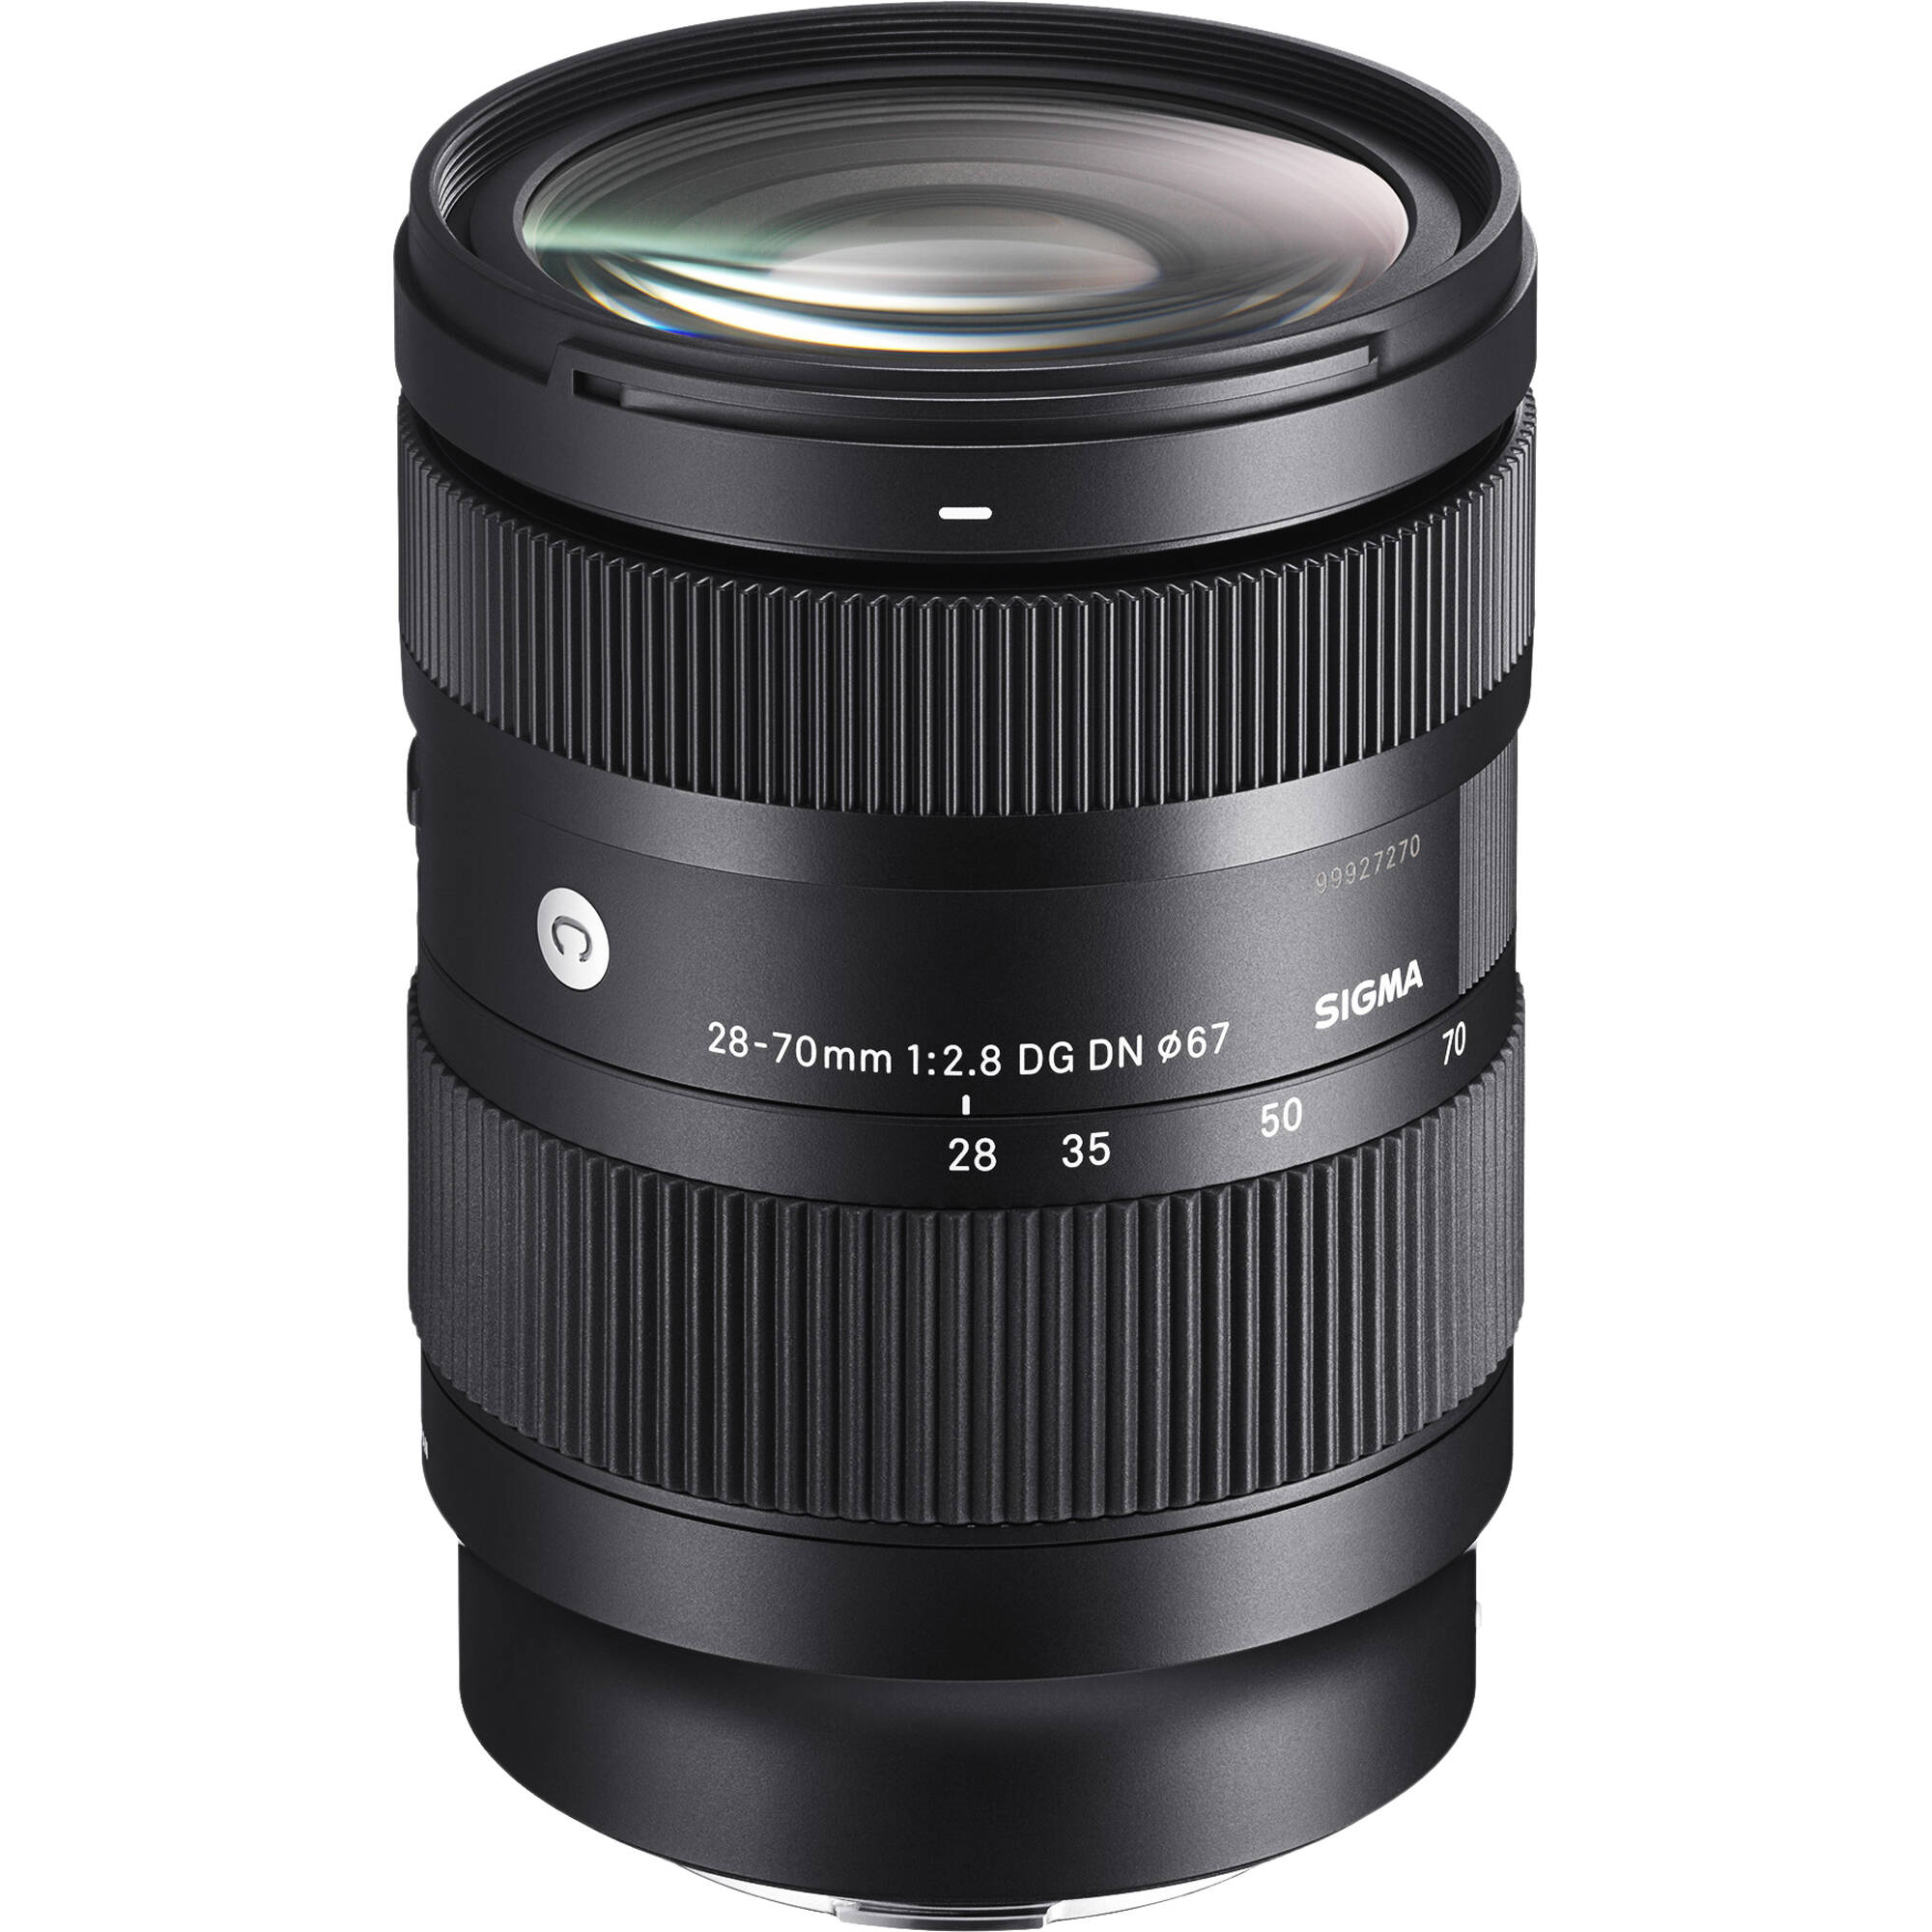 TThumbnail image for Sigma 28-70mm F2.8 DG DN Contemporary L mount